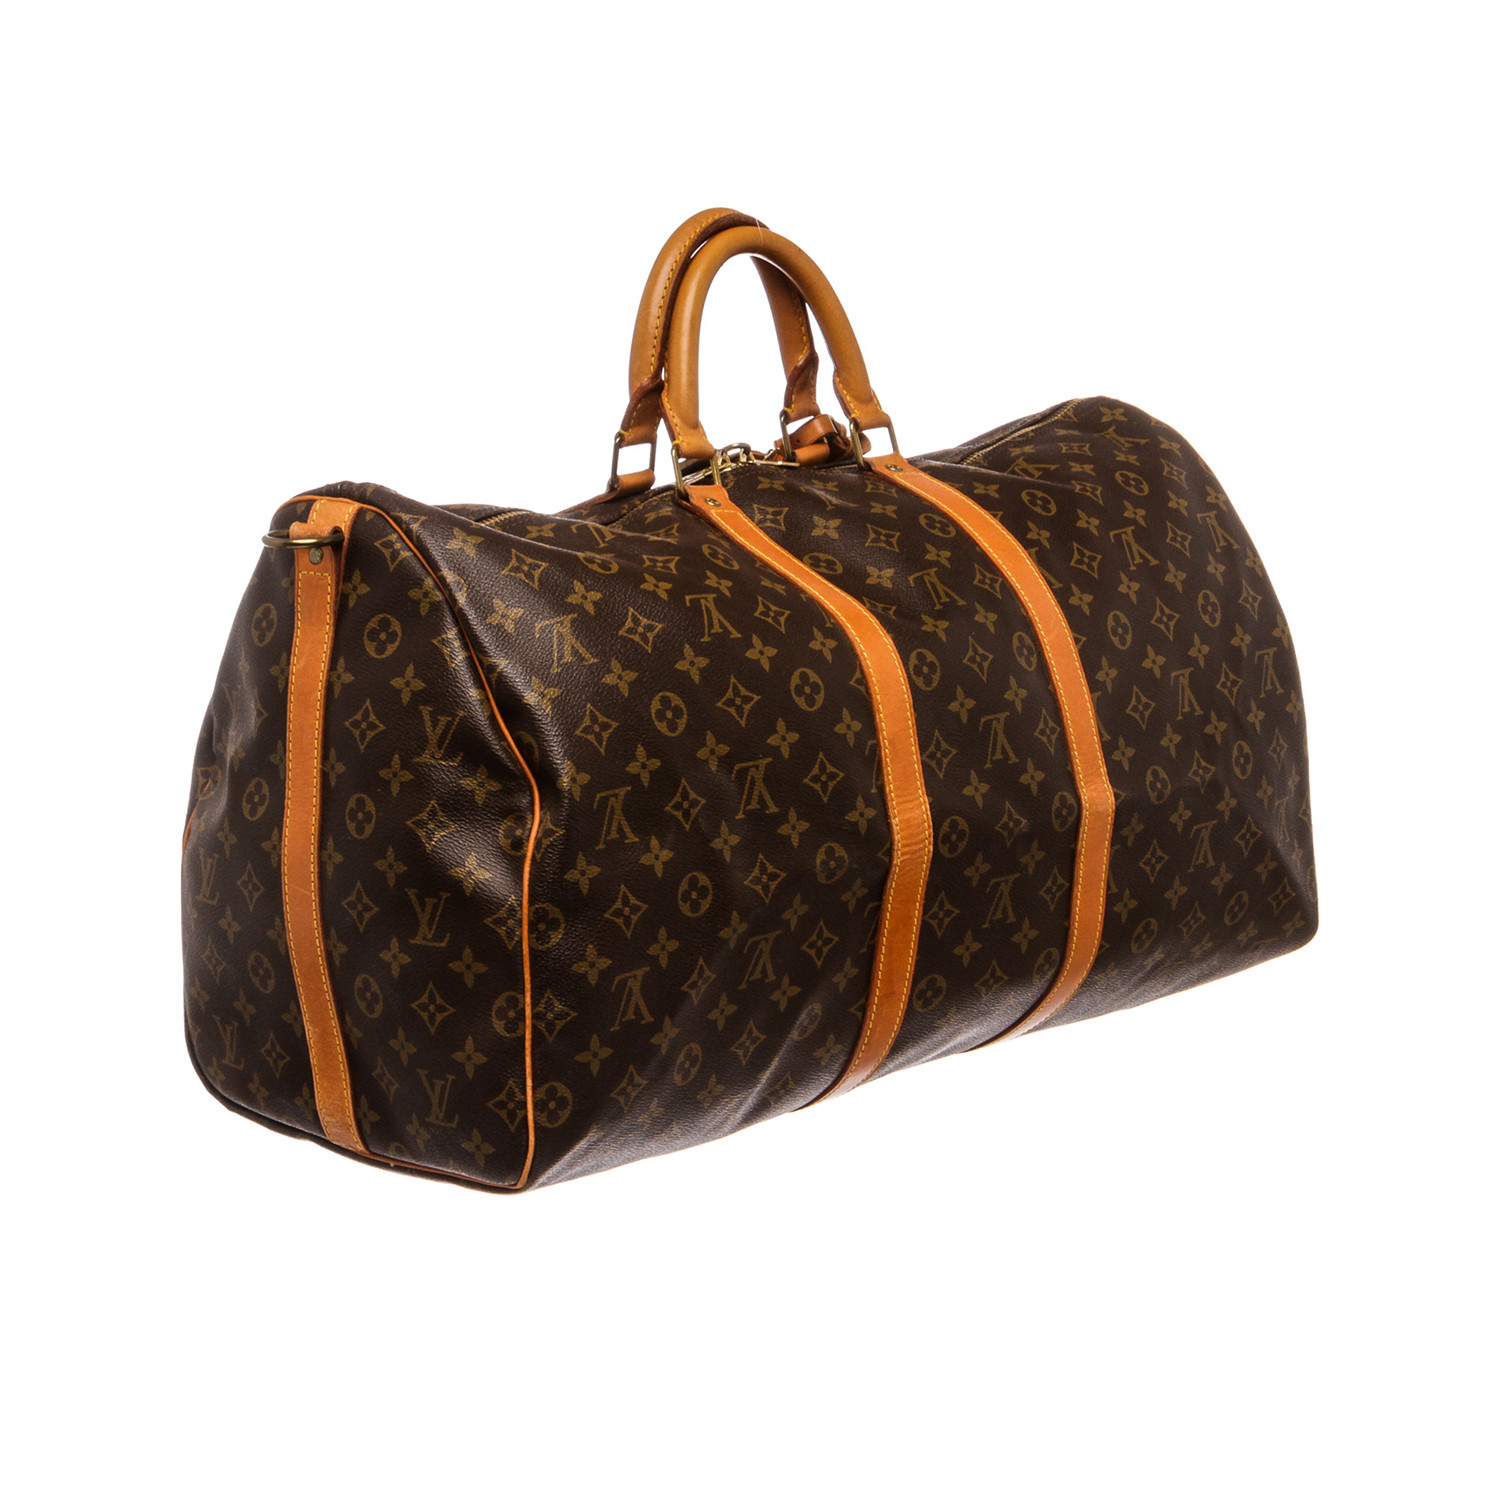 Louis Vuitton Keepall 55 Sale | Confederated Tribes of the Umatilla Indian Reservation